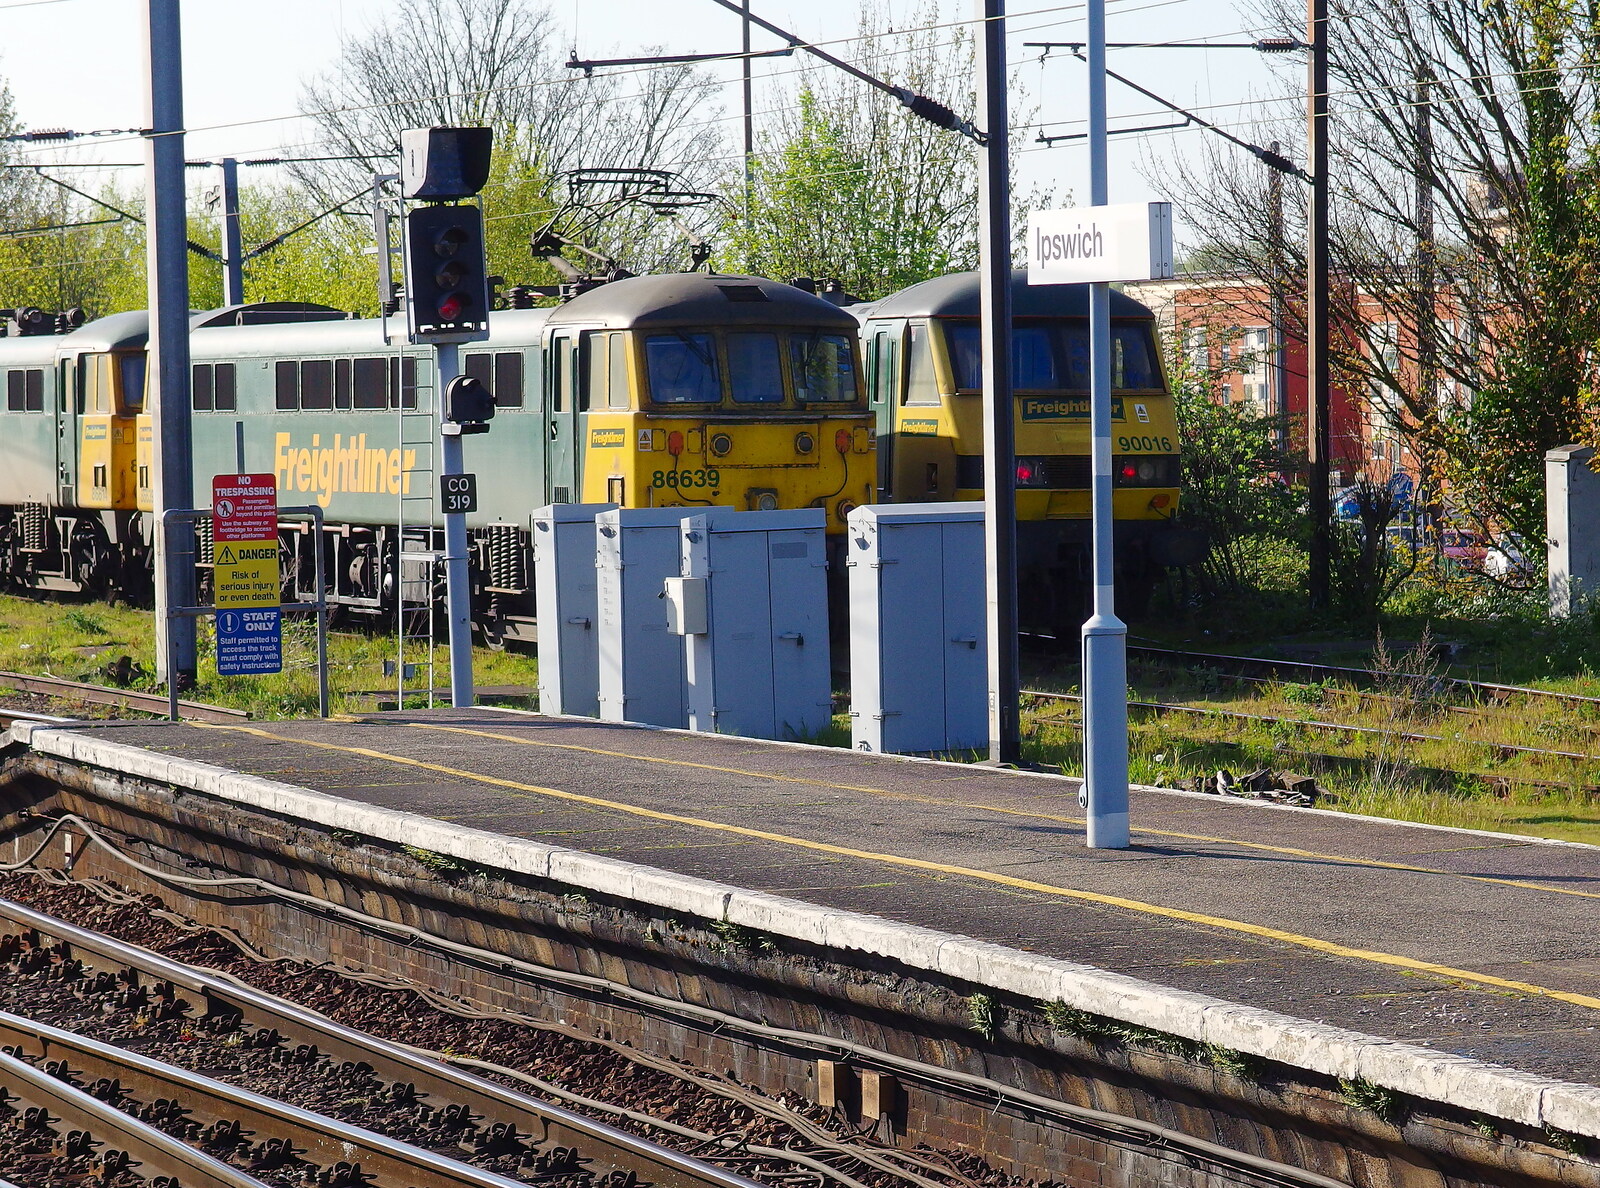 Two Class 86s, built in 1966, lurk at Ipswich from The BSCC at The Black Horse, and an April Miscellany, Thorndon, Diss and Eye, Suffolk - 10th April 2014